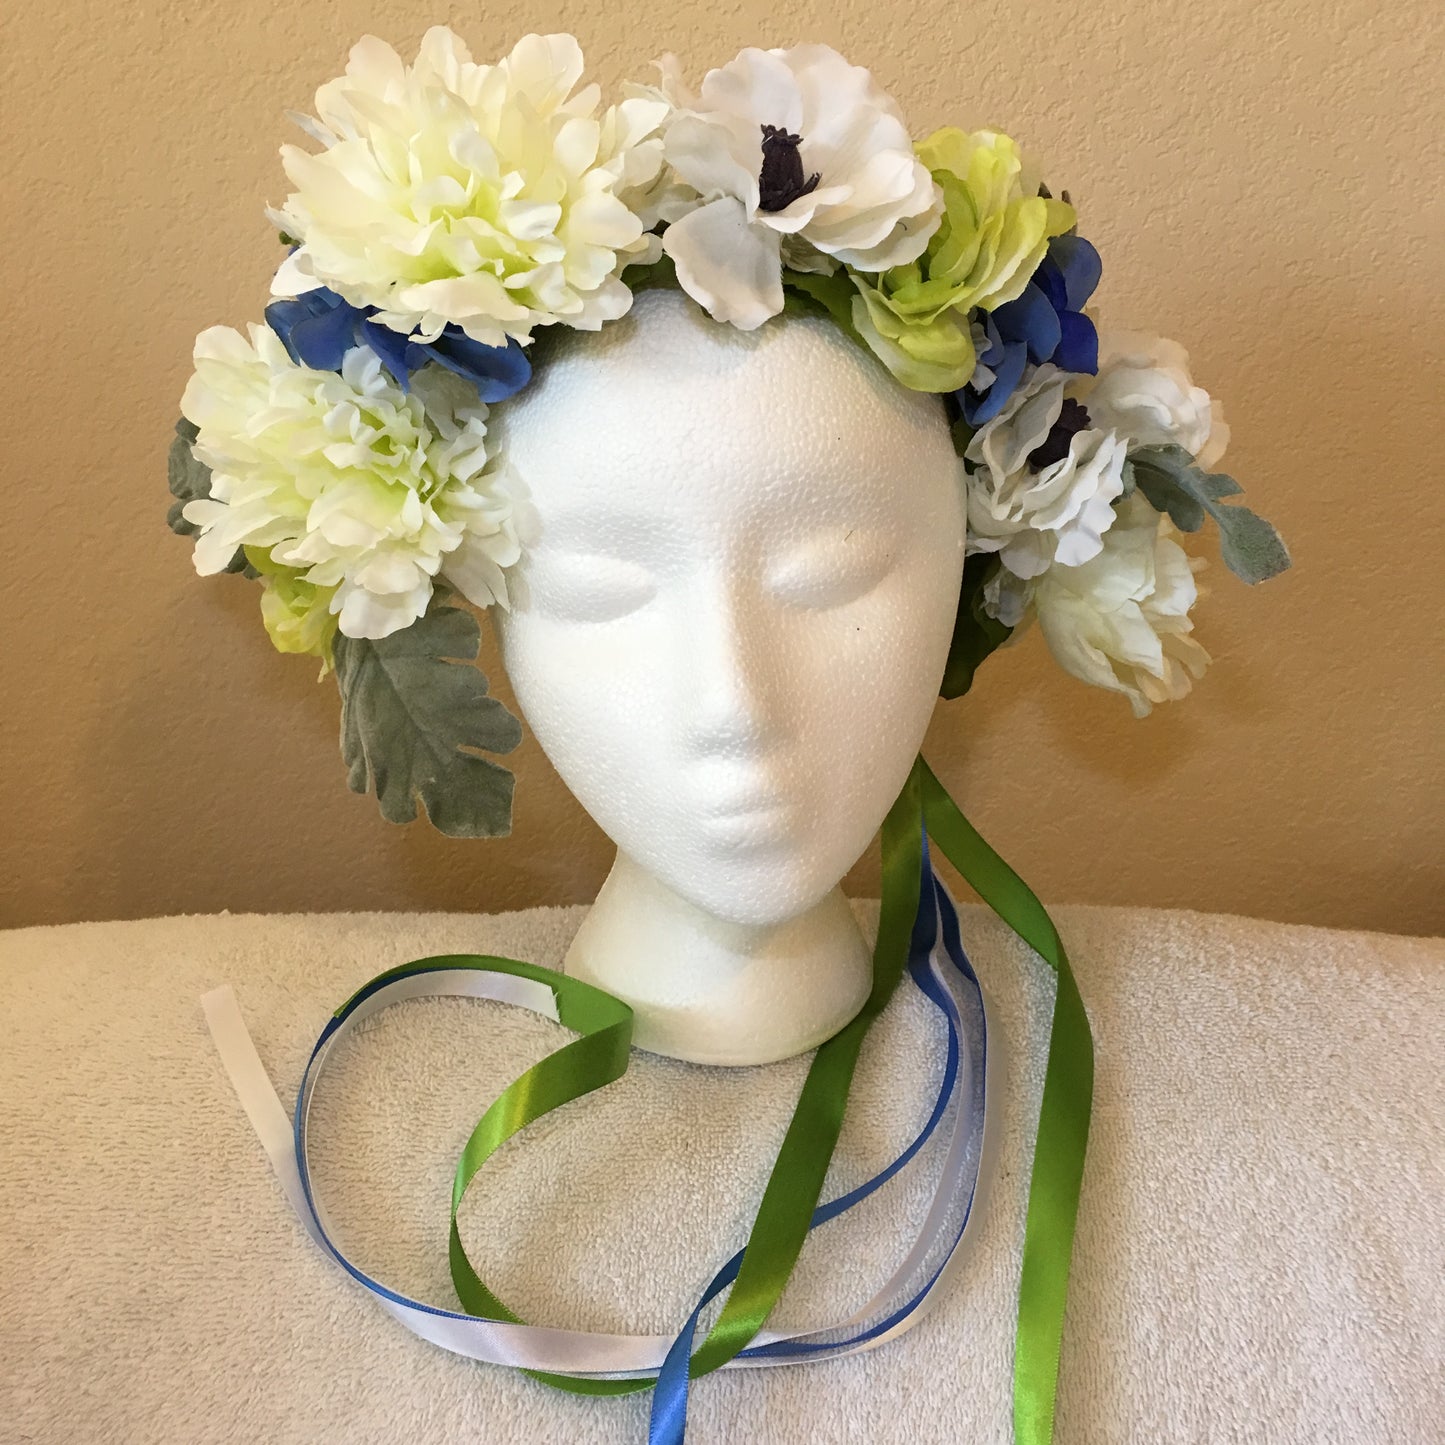 Extra Large Wreath - White, blue & green flowers